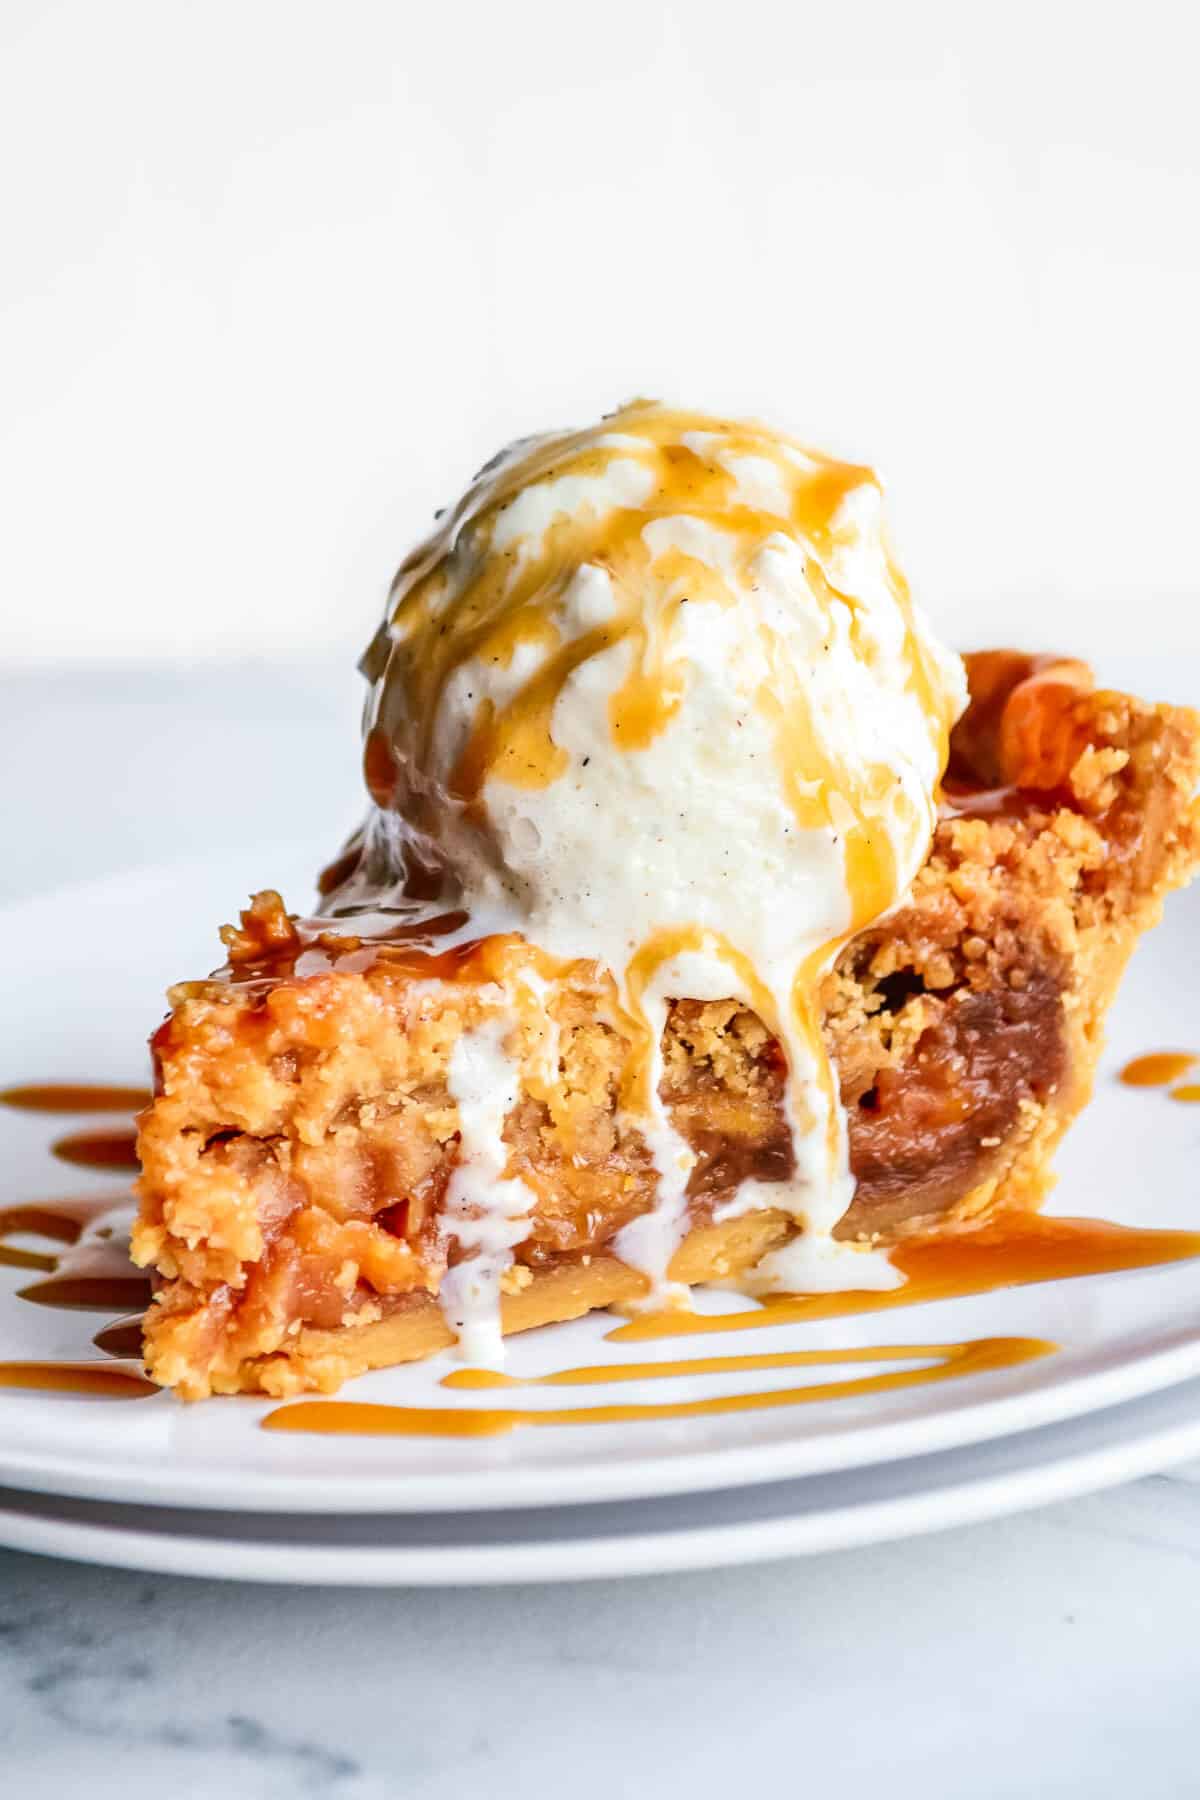 Caramel Apple Pie with Crumb Topping on a white plate with a scoop of vanilla ie cream and drizzled with caramel sauce.